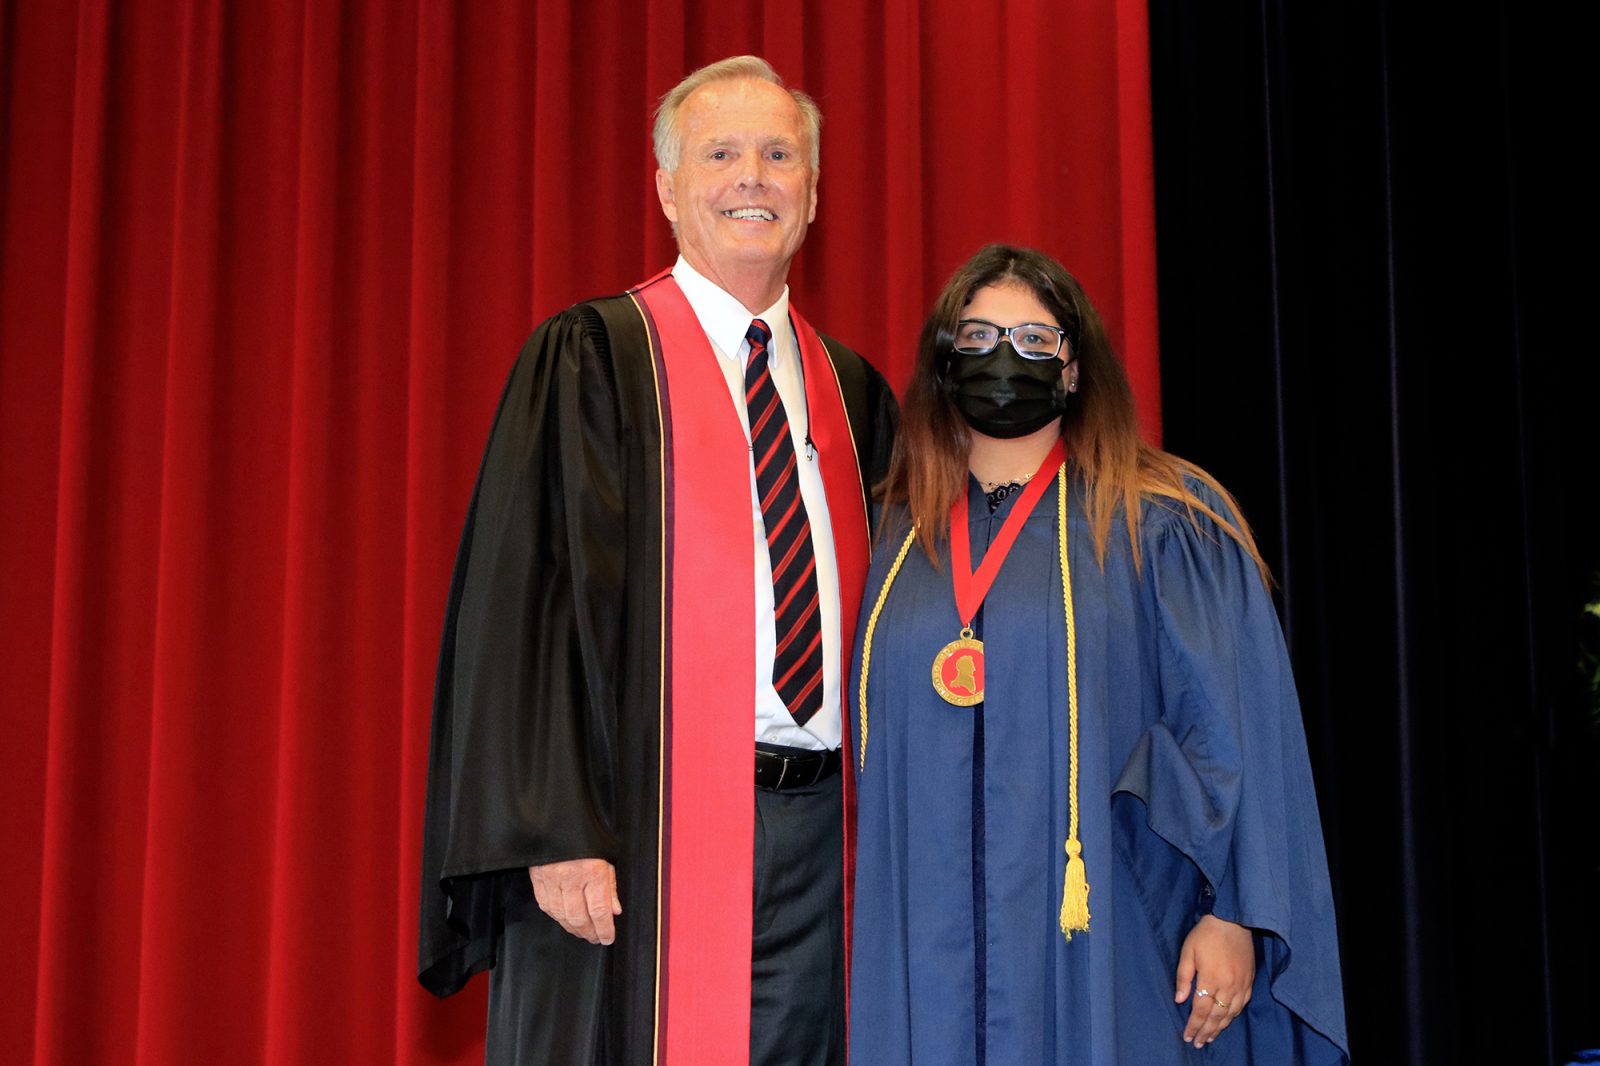 A man and a woman in Convocation gowns stand together with red and black curtains in the background.